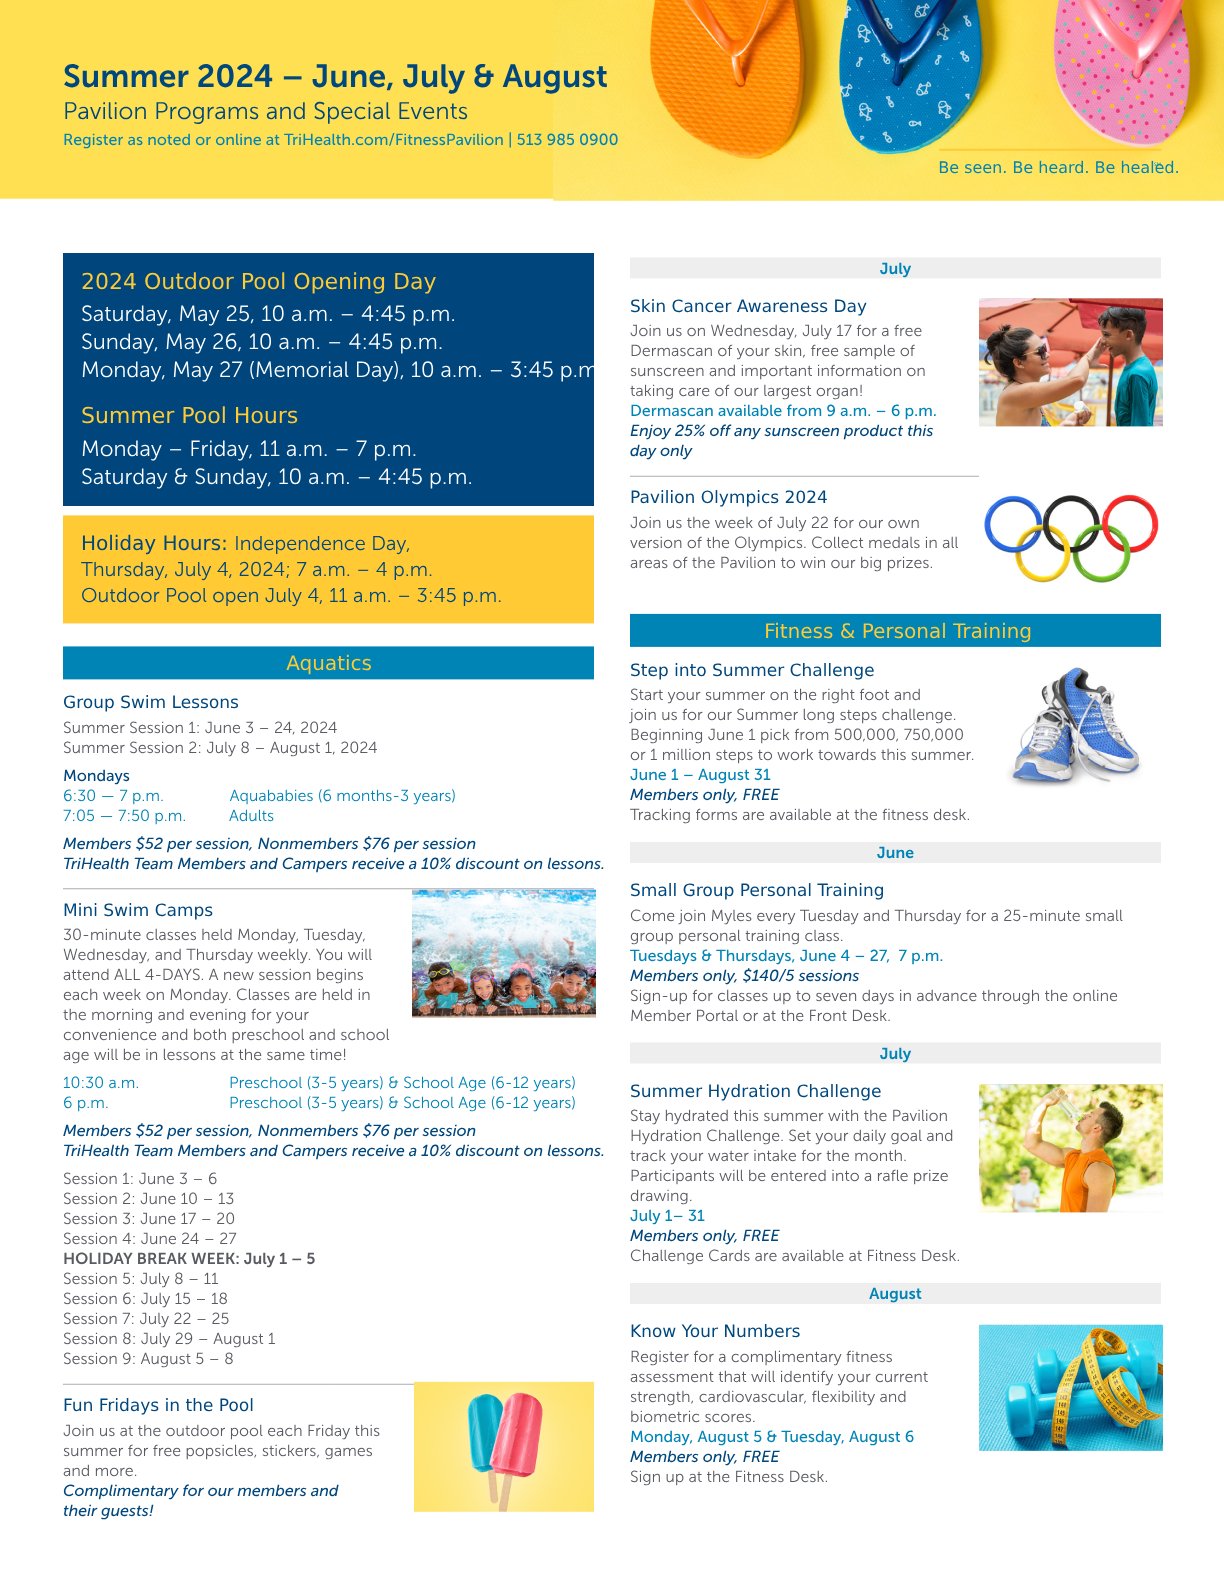 Summer 2024 Quarterly Programs and Events p1